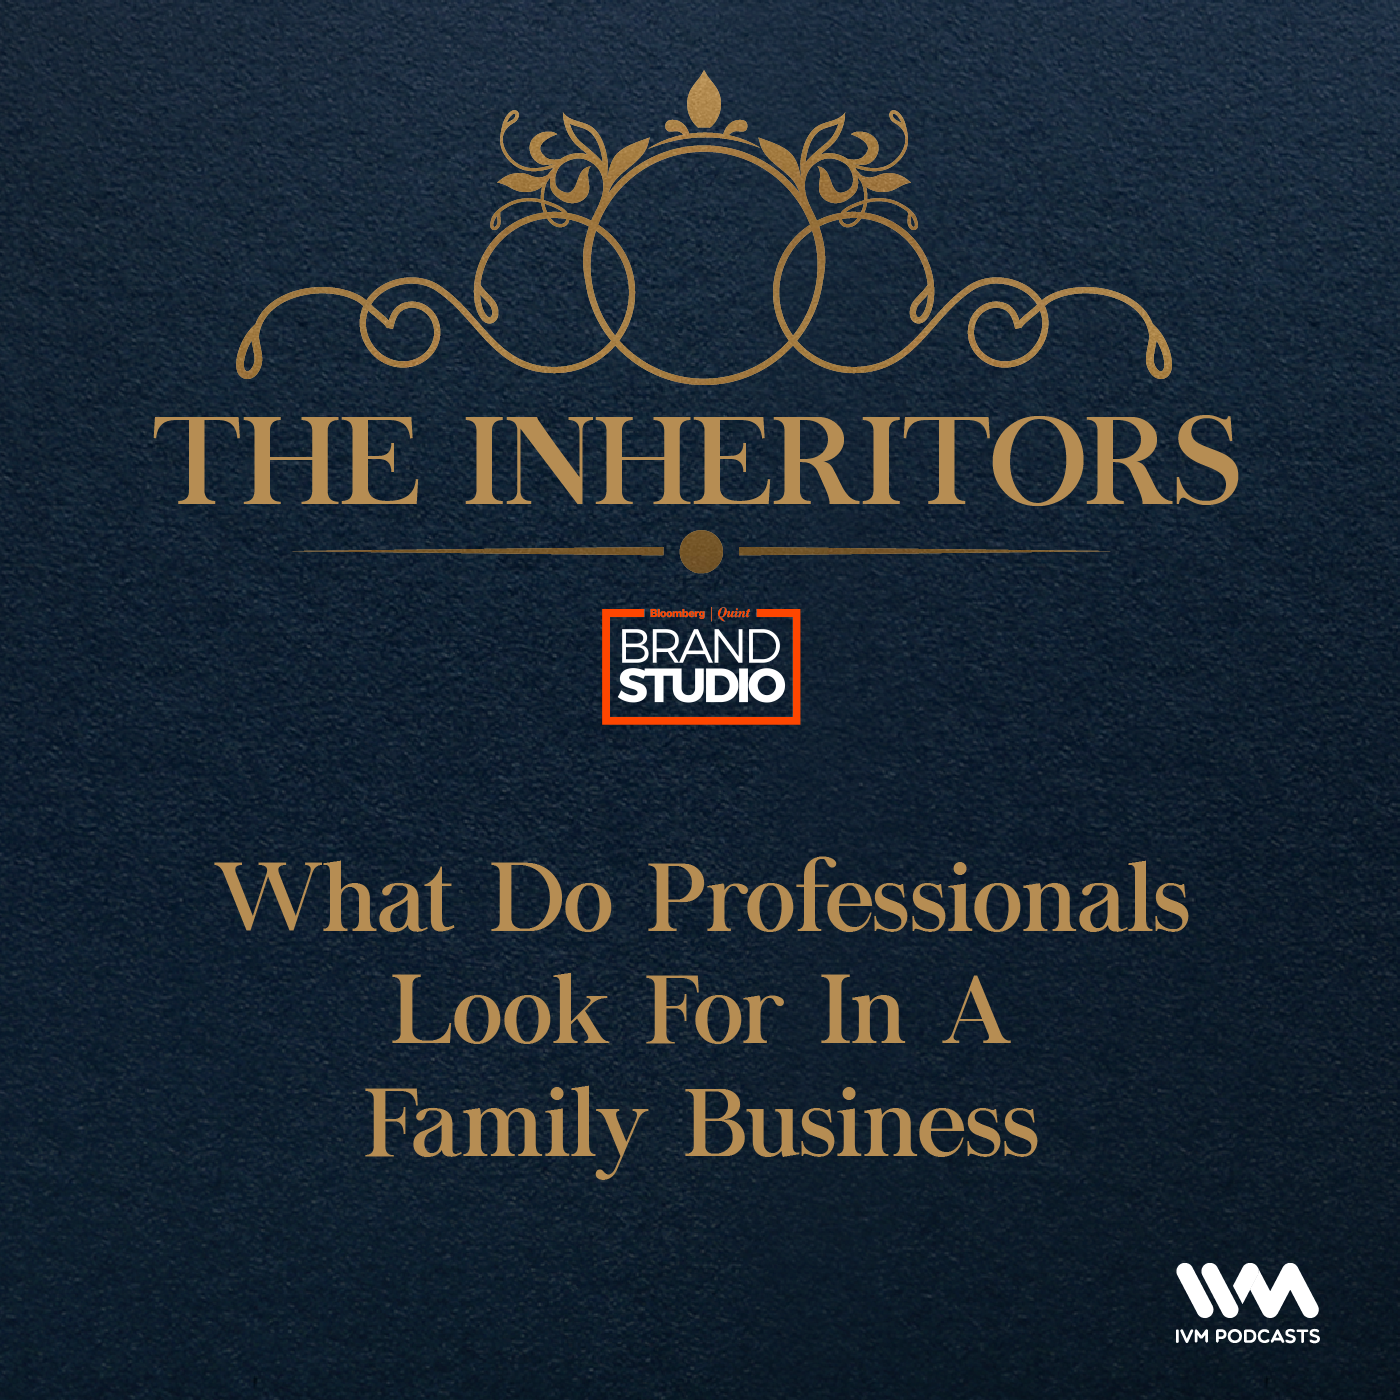 What Do Professionals Look For in a Family Business